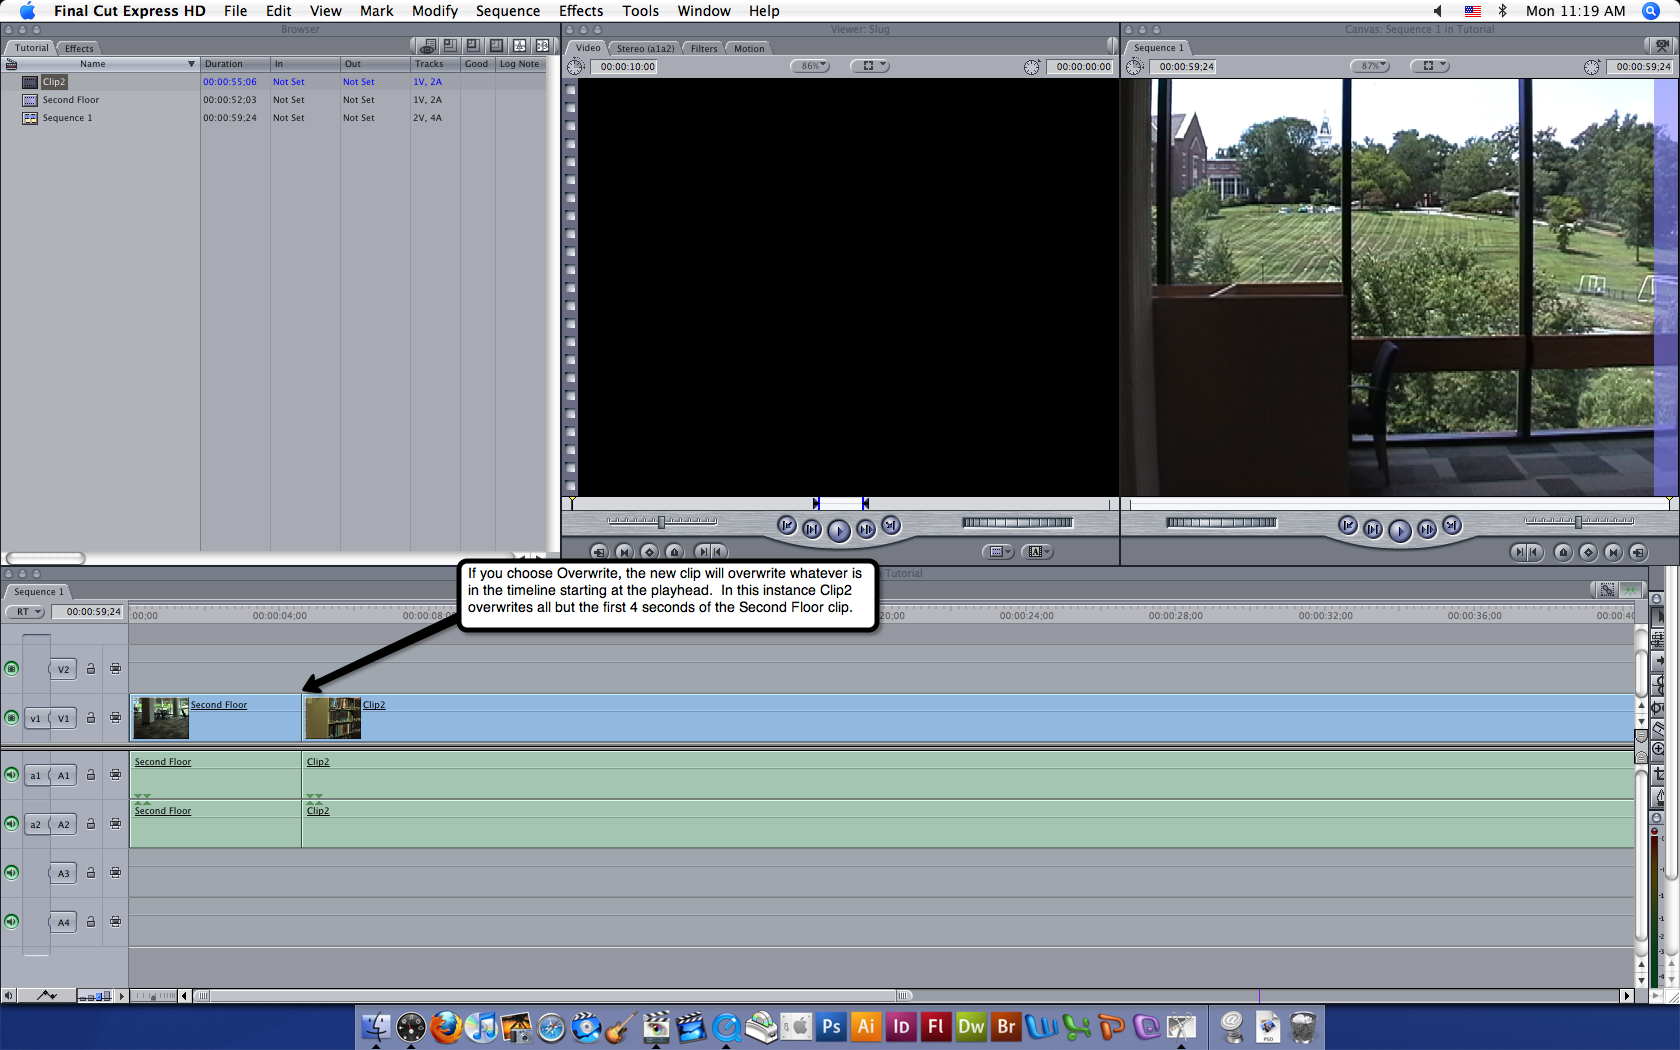 Visual guide to adding video to Final Cut Express HD via the overwrite video function.